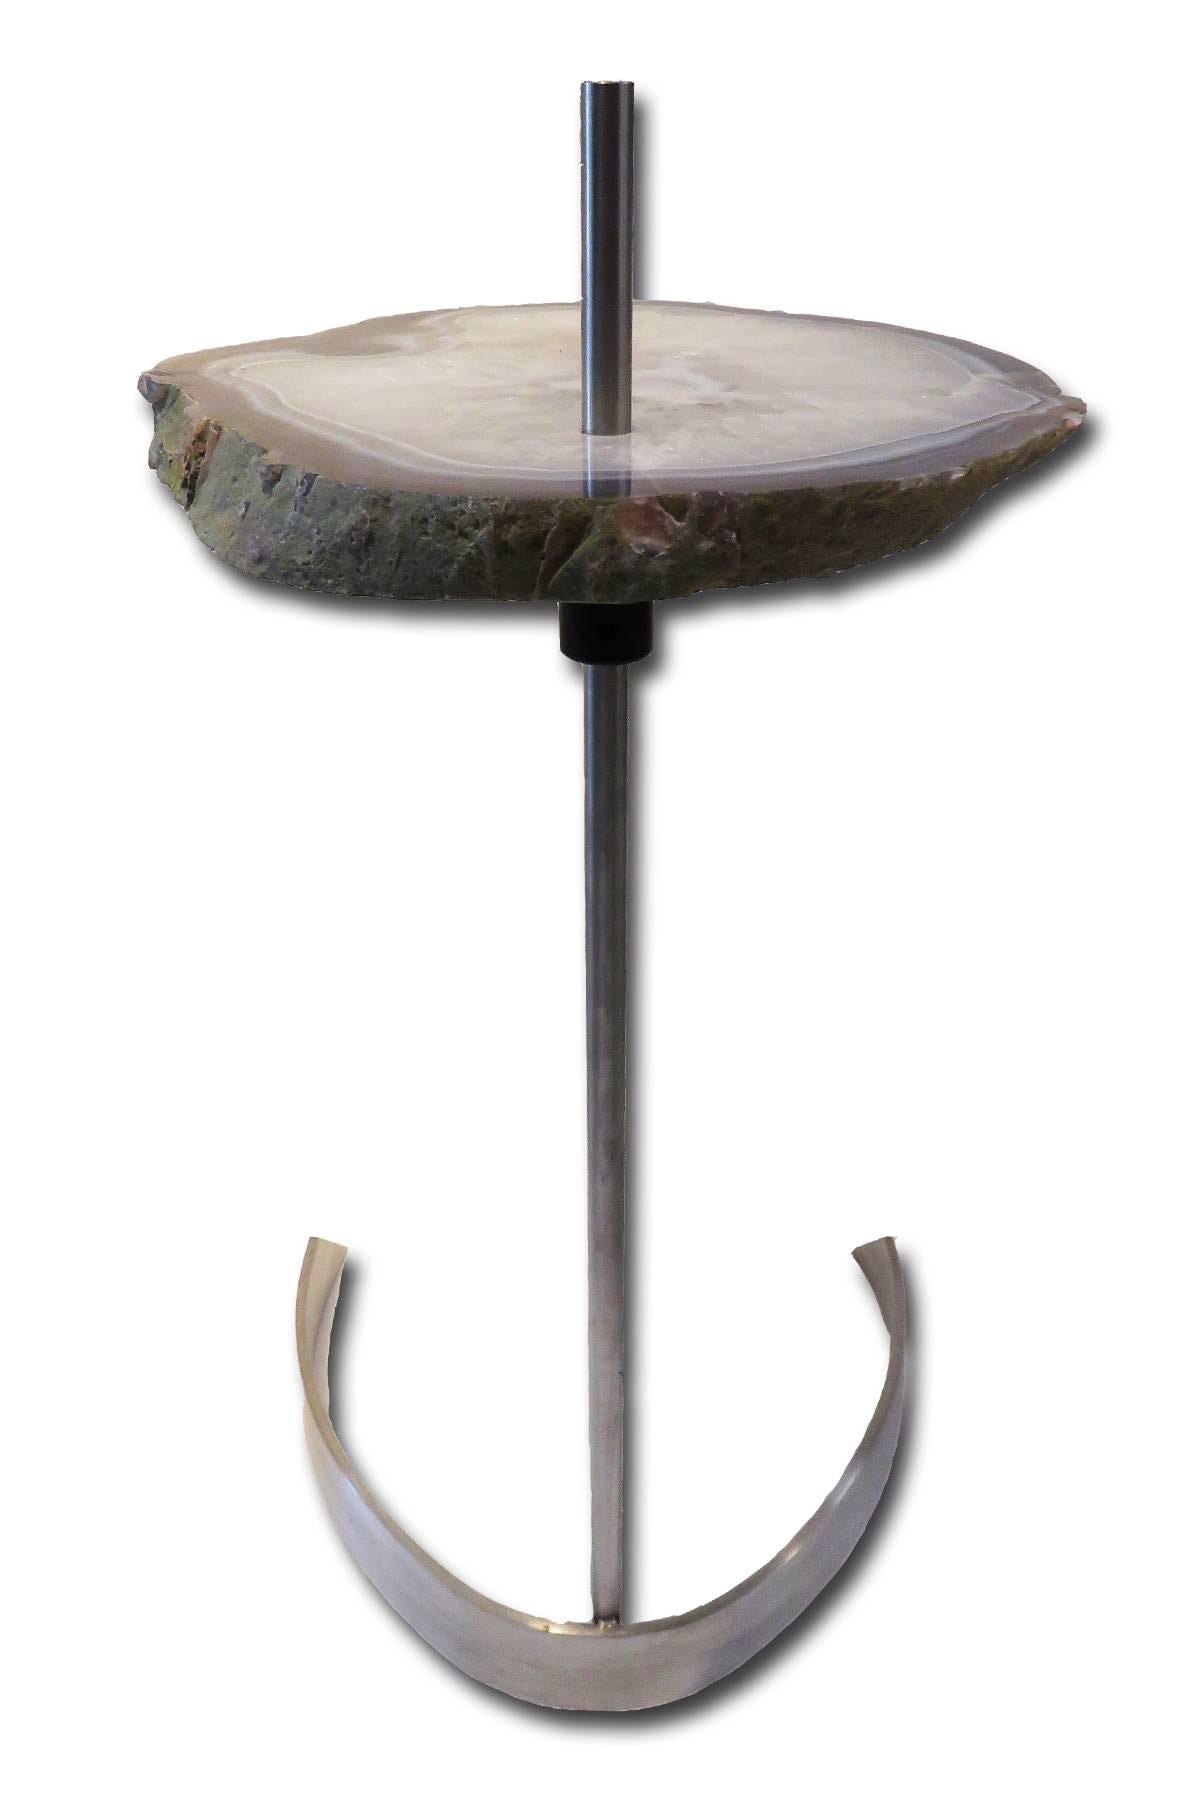 Organic Modern Side or Cocktail Table, Brazilian Agate, Adjustable Height Stainless Steel Base